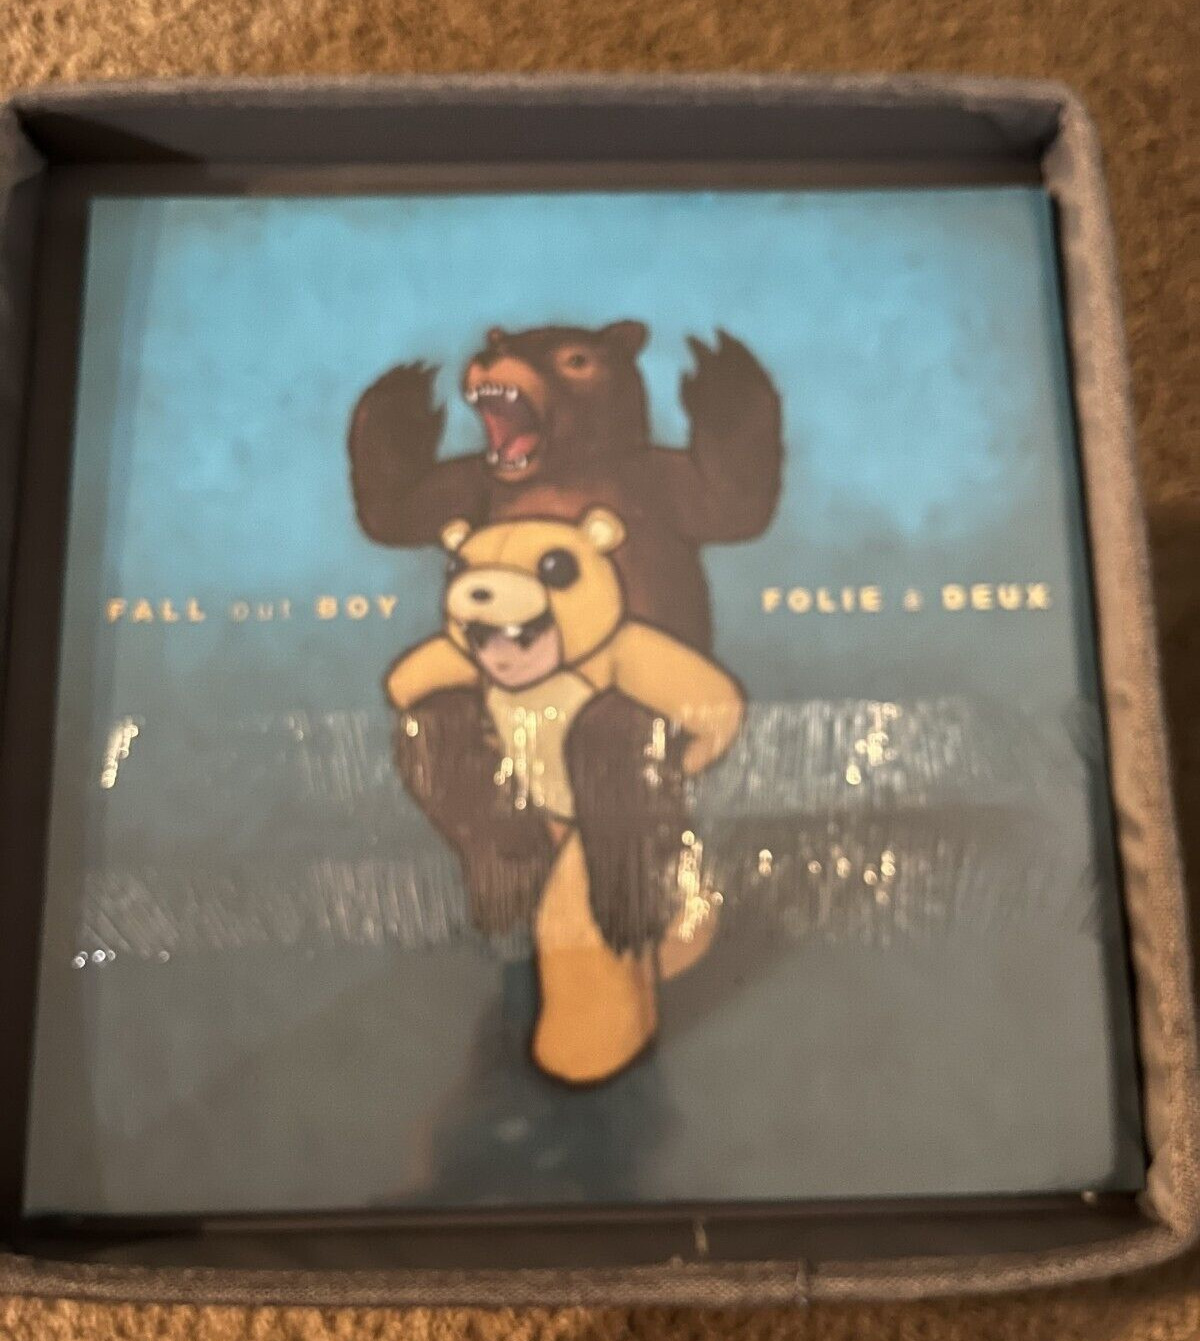 Fall Out Boy Folie a Deux 2LP BLUE MARBLE Limited Edition IN HAND SHIPS NEXT DAY